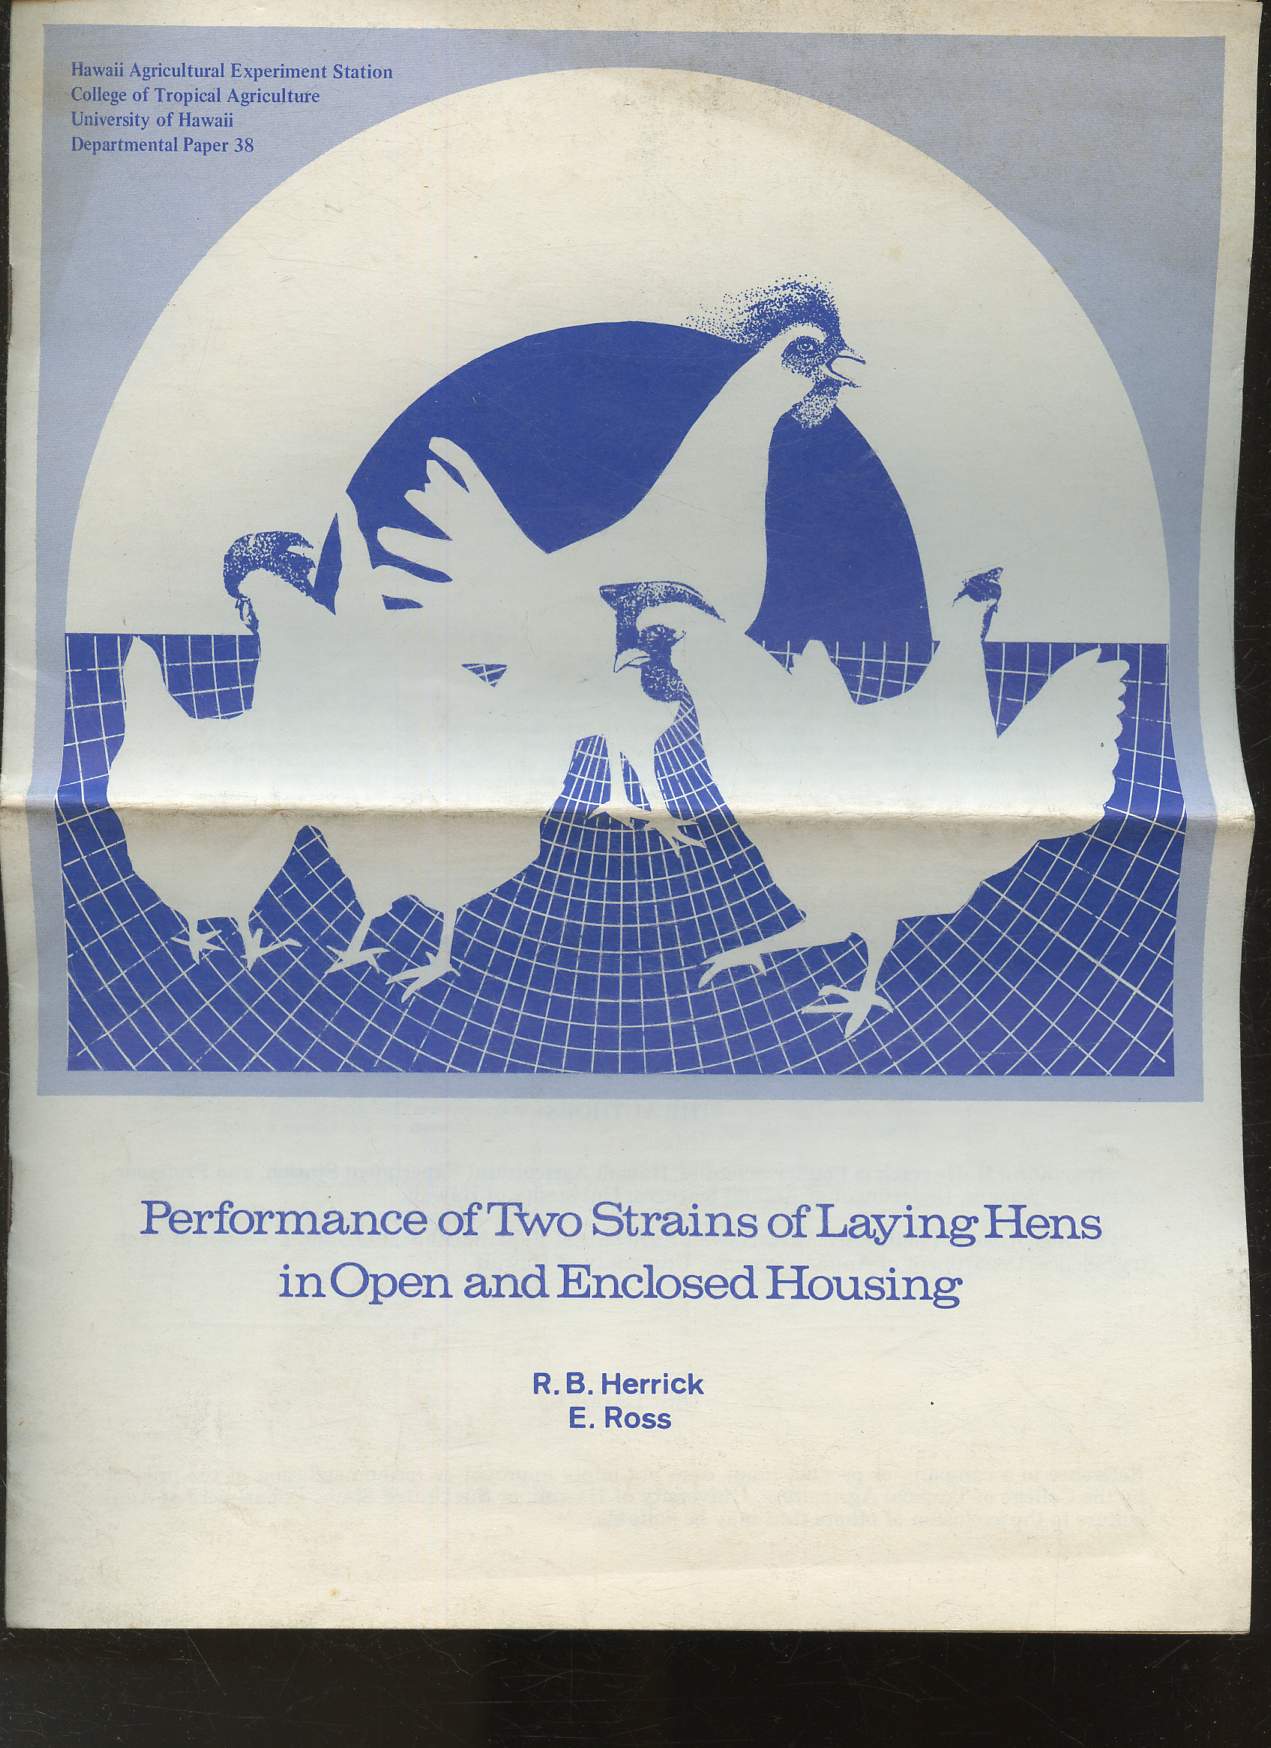 Performance of two Strains of Laying Hens on Open and Enclosed Housing